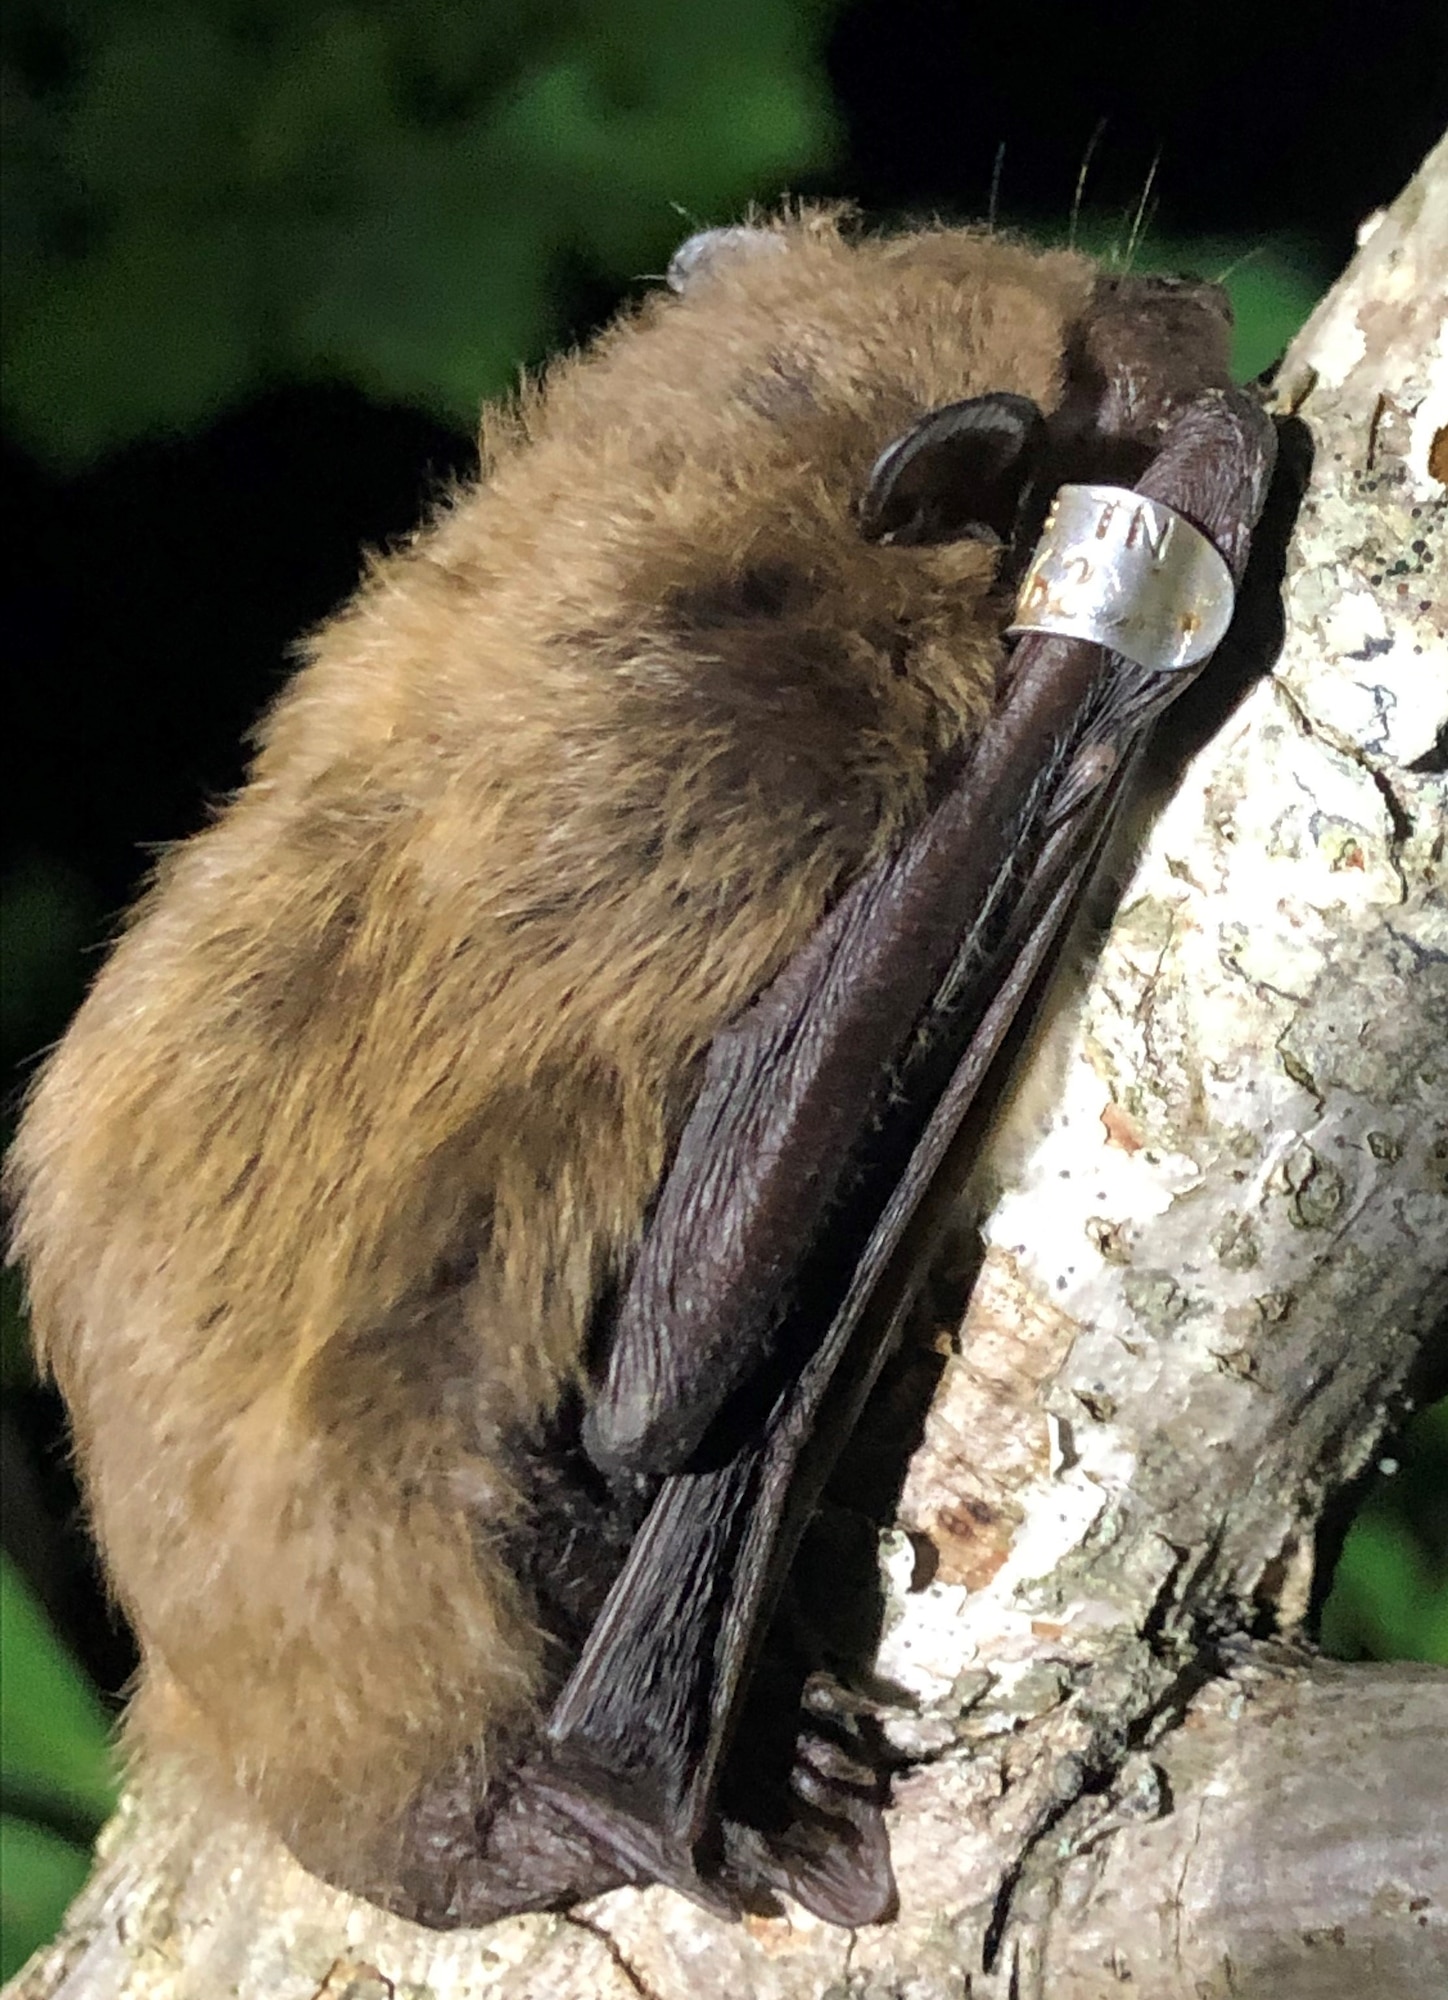 Evening bats spend all year in forests and never enter caves. This individual was recaptured at the same location on base two years after being banded. (U.S. Air Force photo by John Lamb)